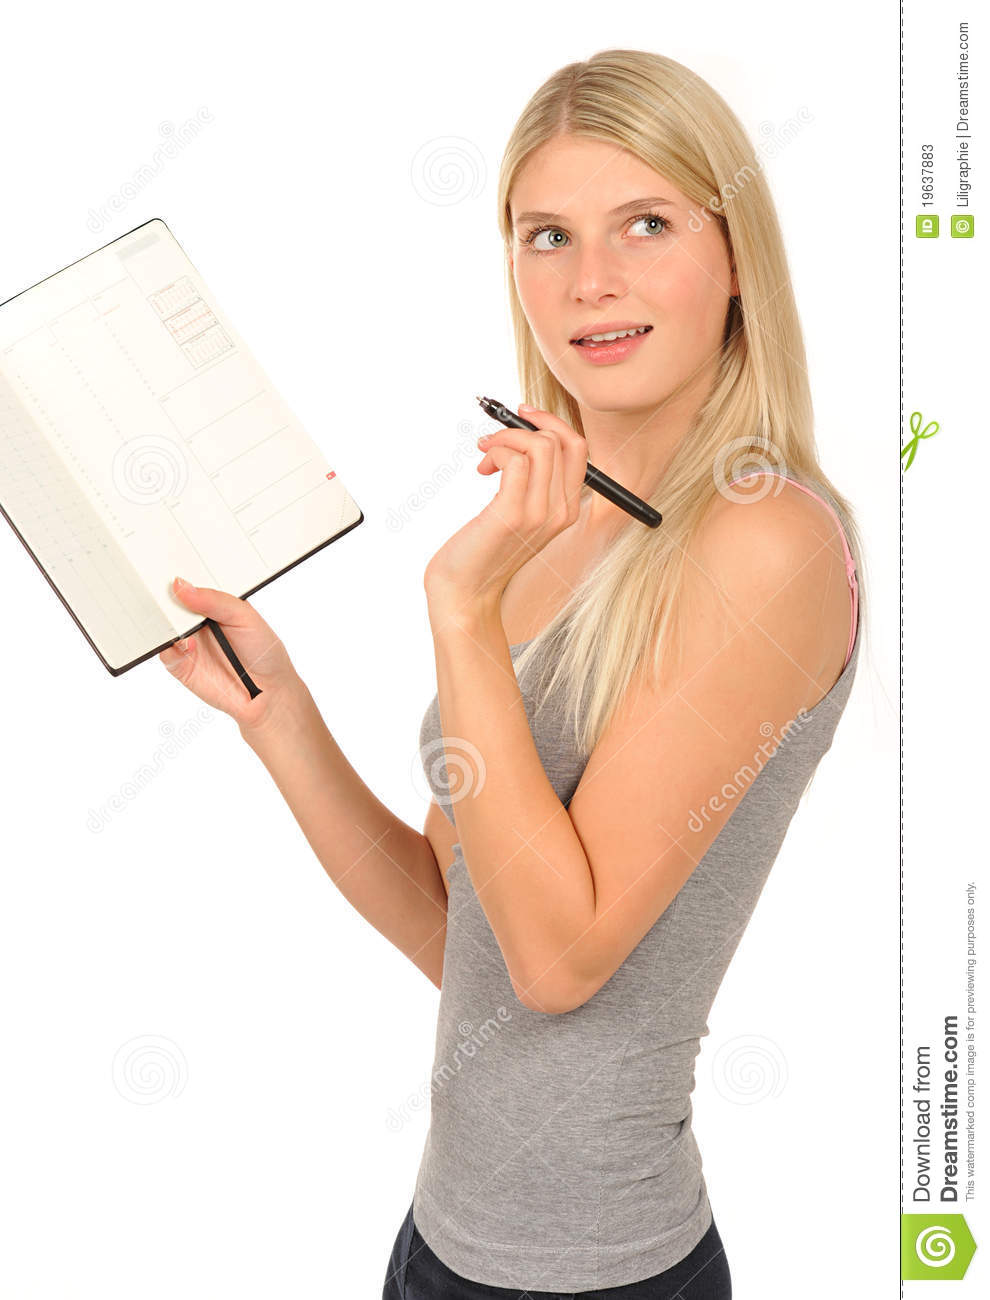 Cute Girl With A Diary Stock Photos   Image  19637883